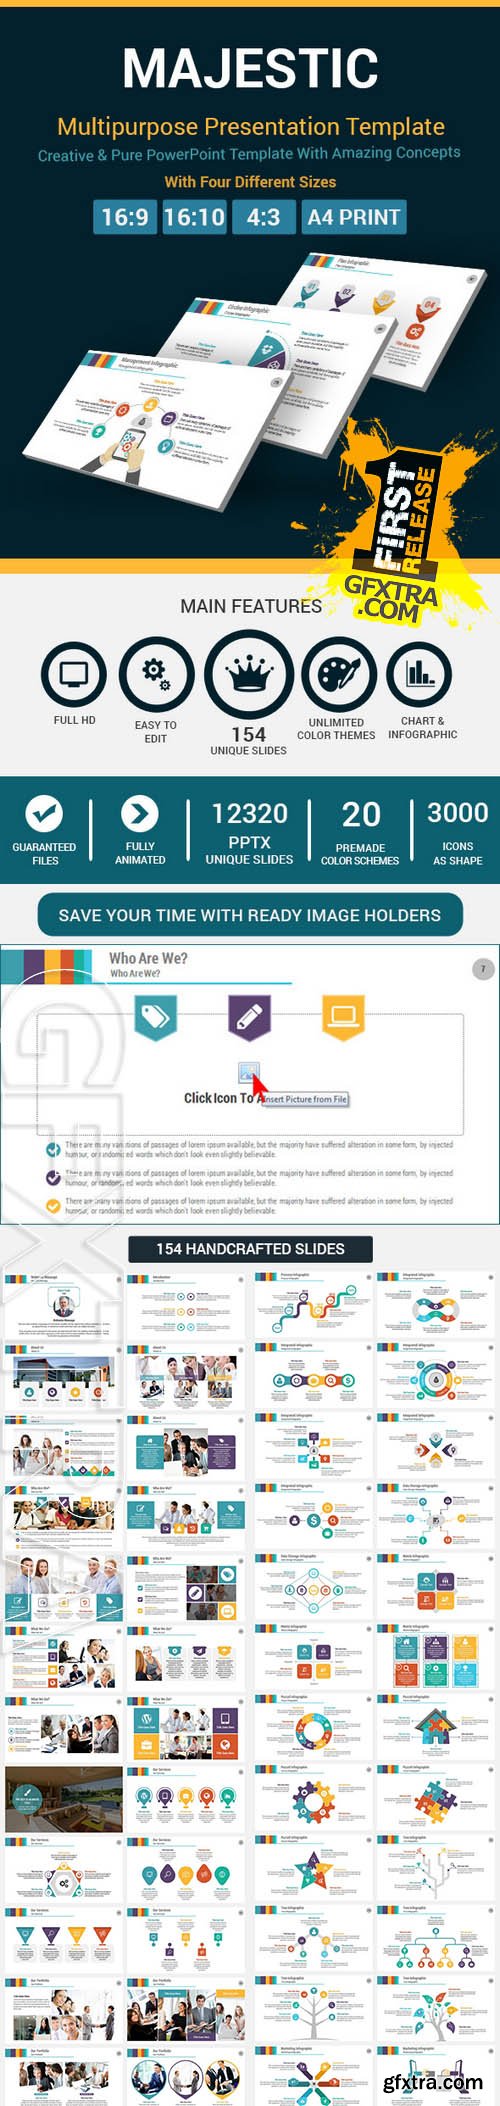 Majestic PowerPoint Presentation Template - GraphicRiver 11107948